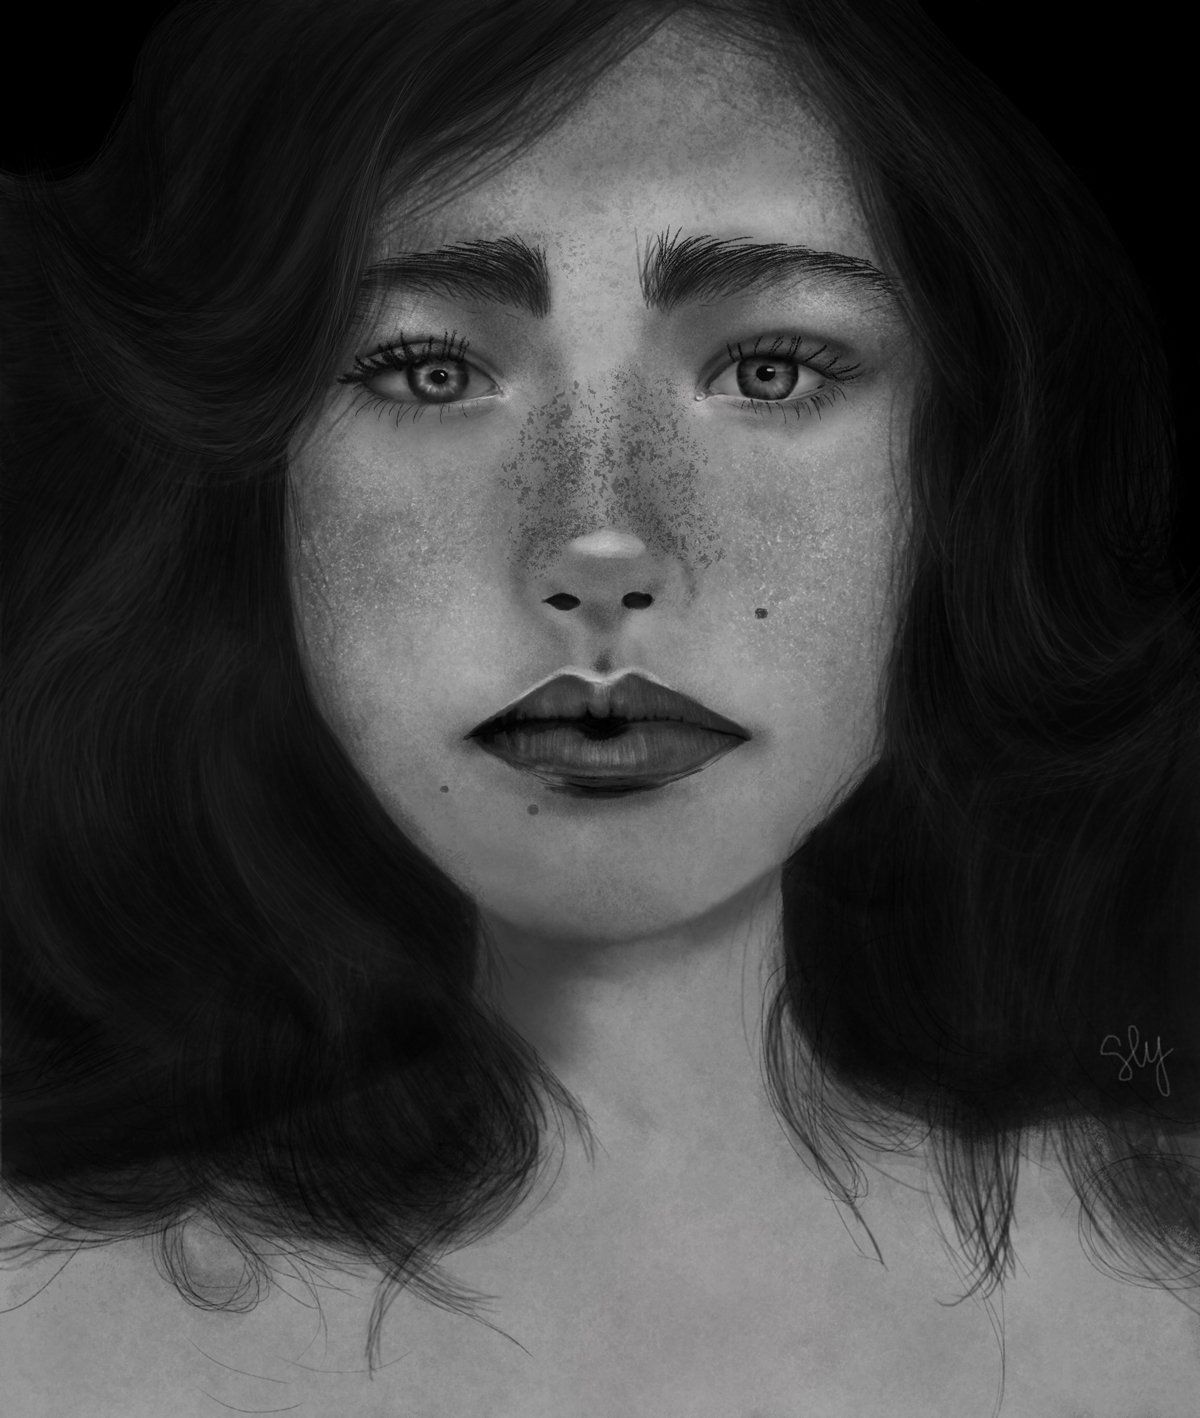 2020 Quarantine Art - portrait of young woman with freckles and distant gaze. 